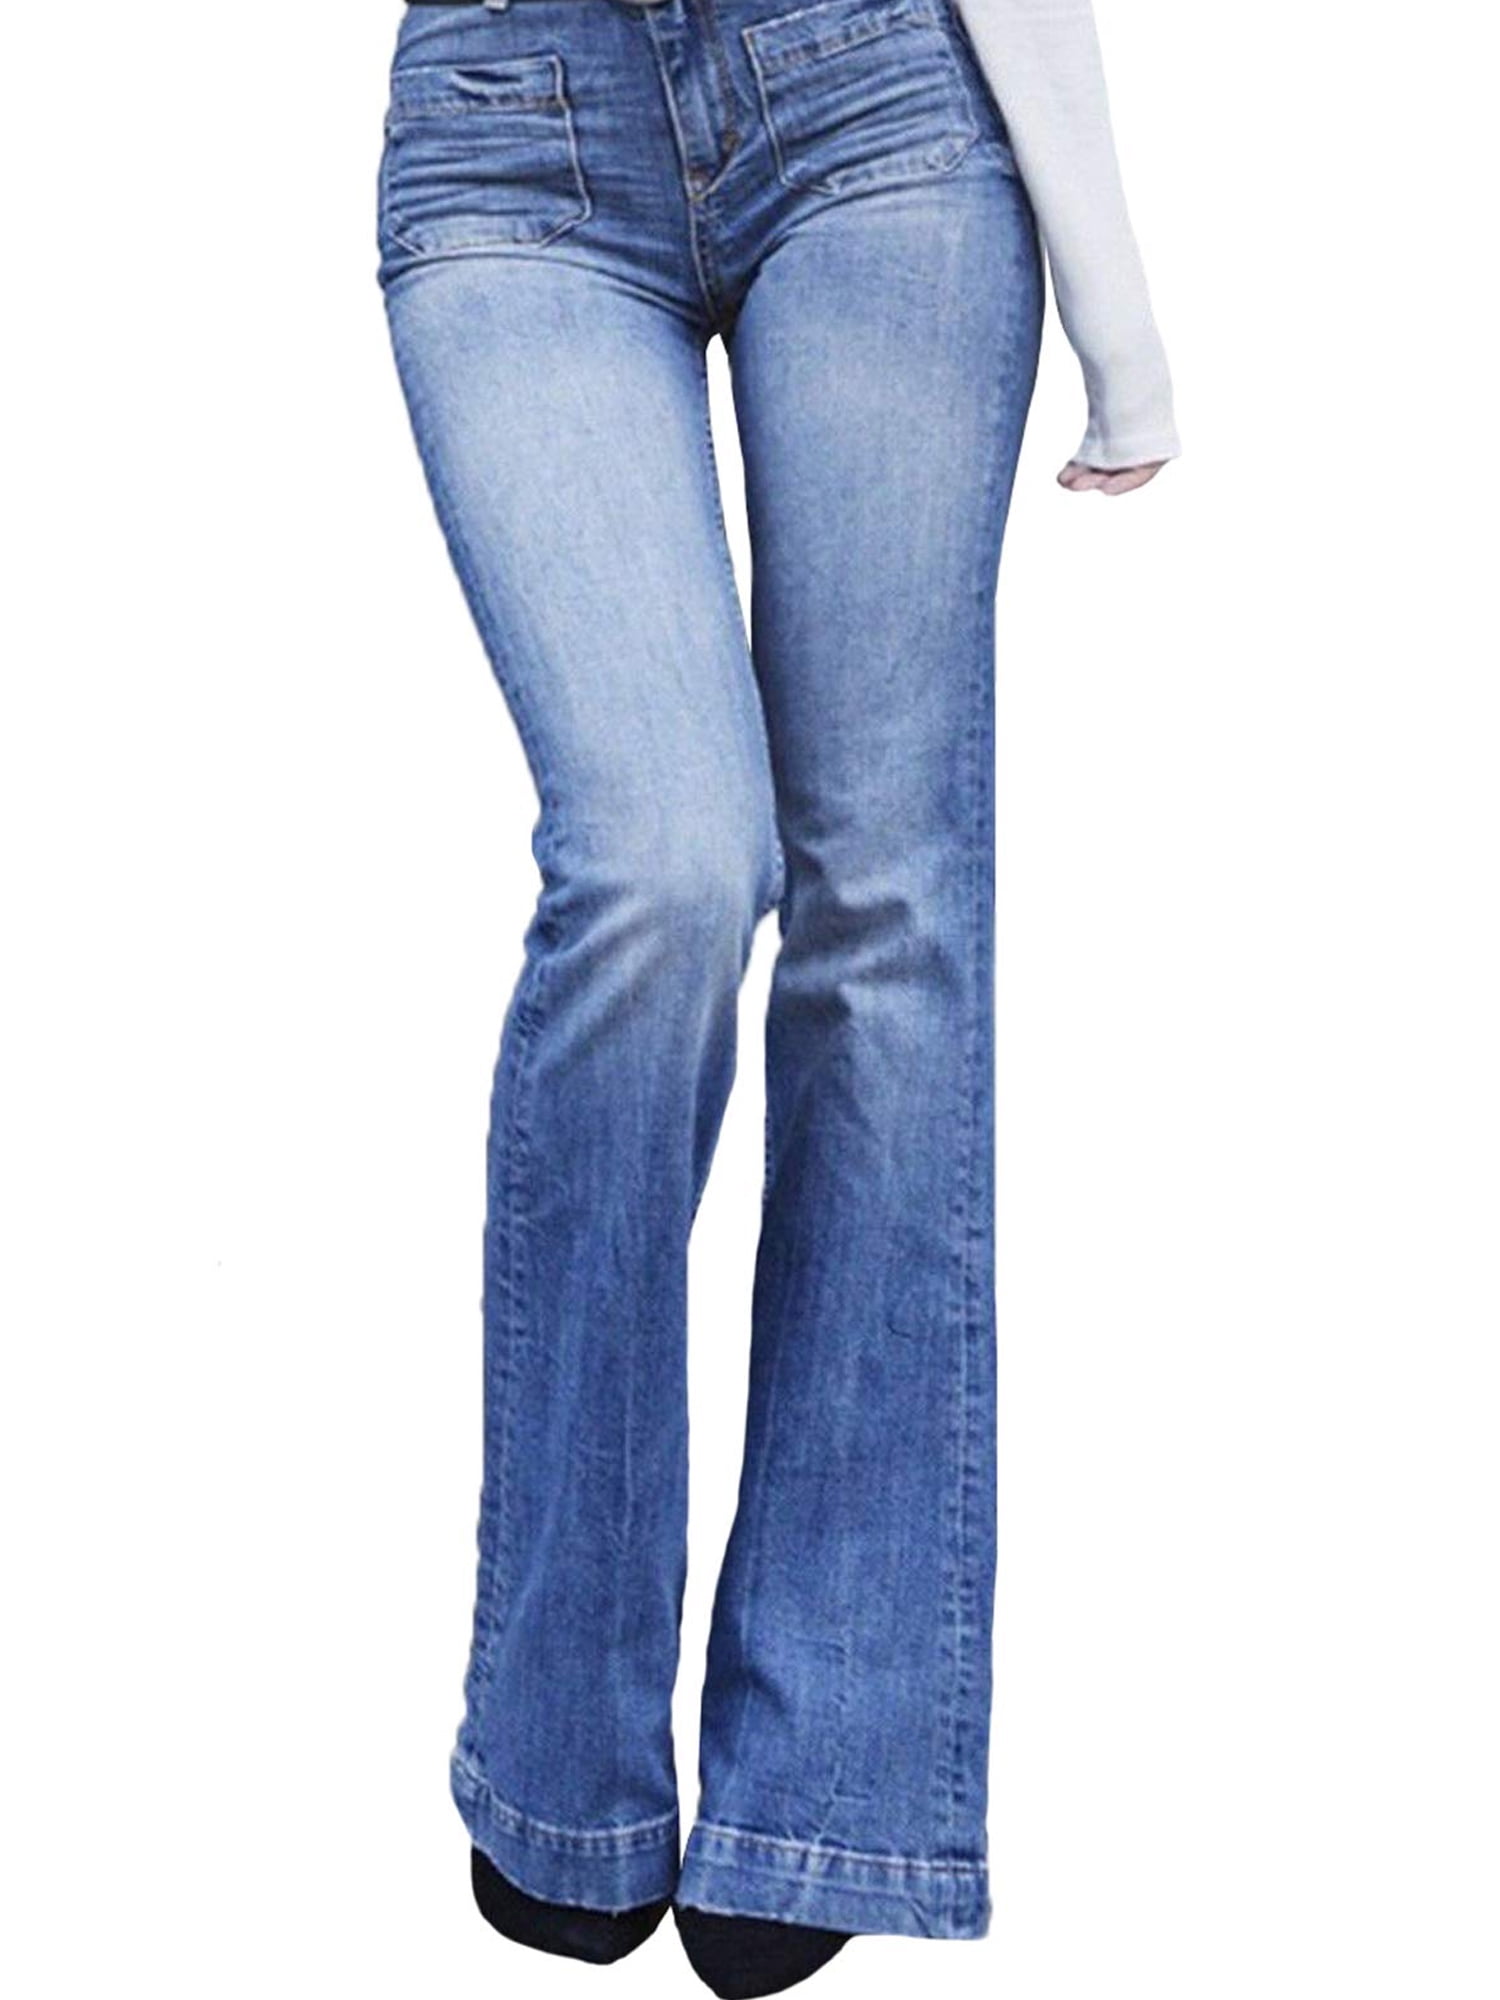 jegging bootcut jeans